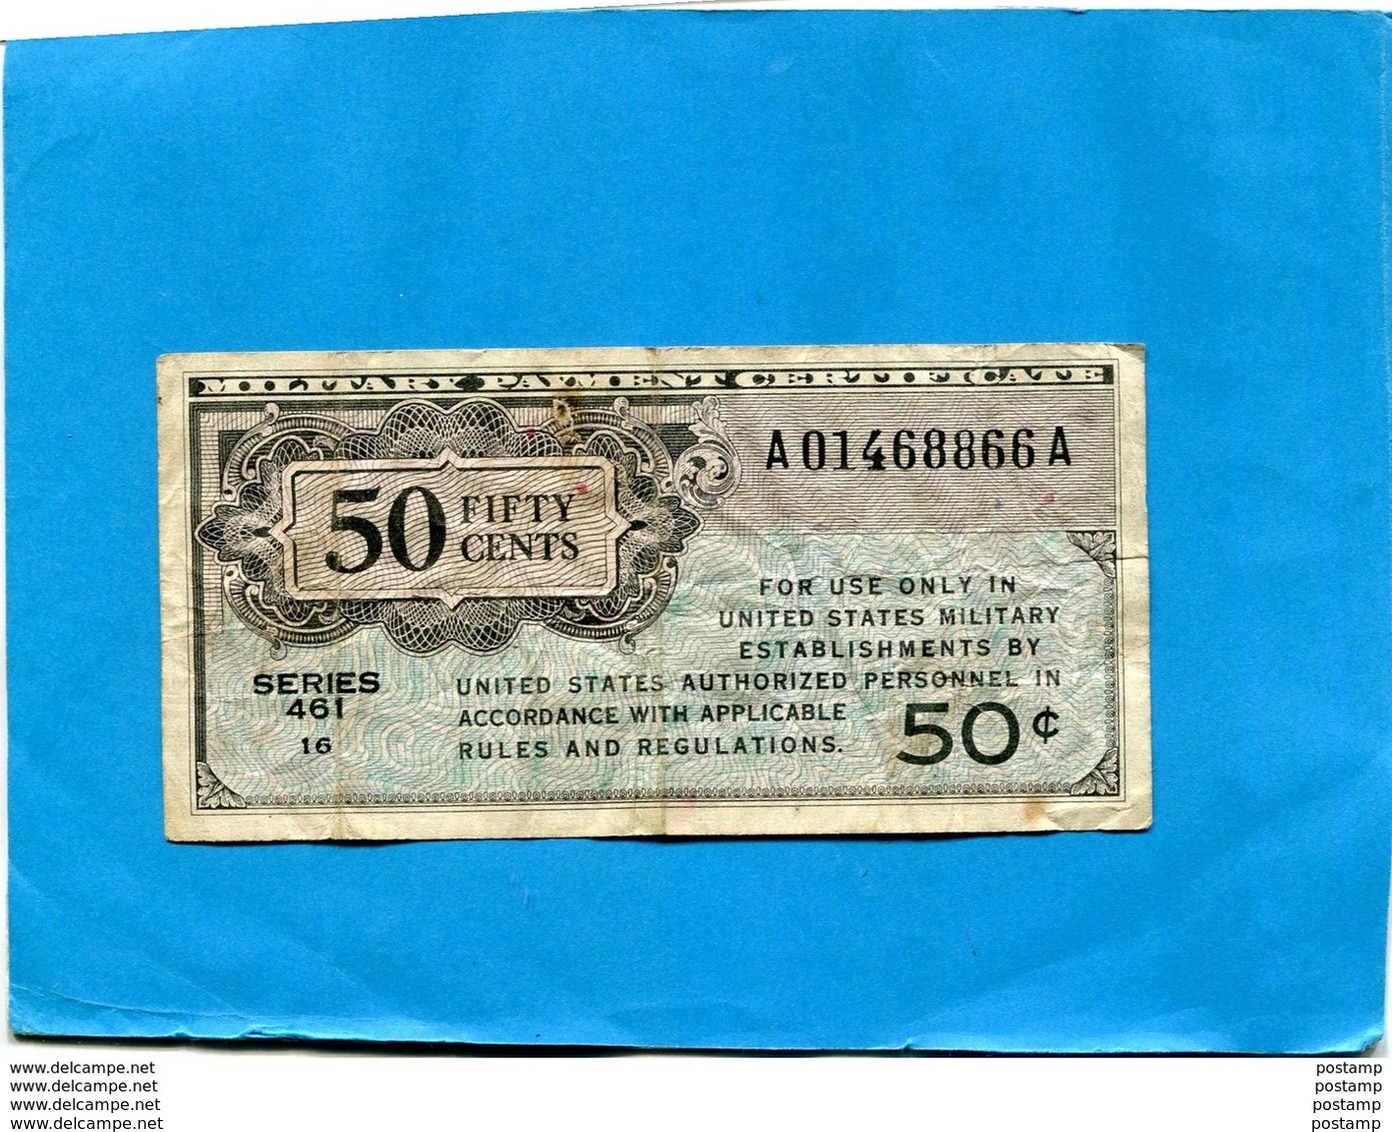 MILITARY PAYMENT CERTIFICATE 50  Cents Série 461 -16---1946 - 1946 - Series 461